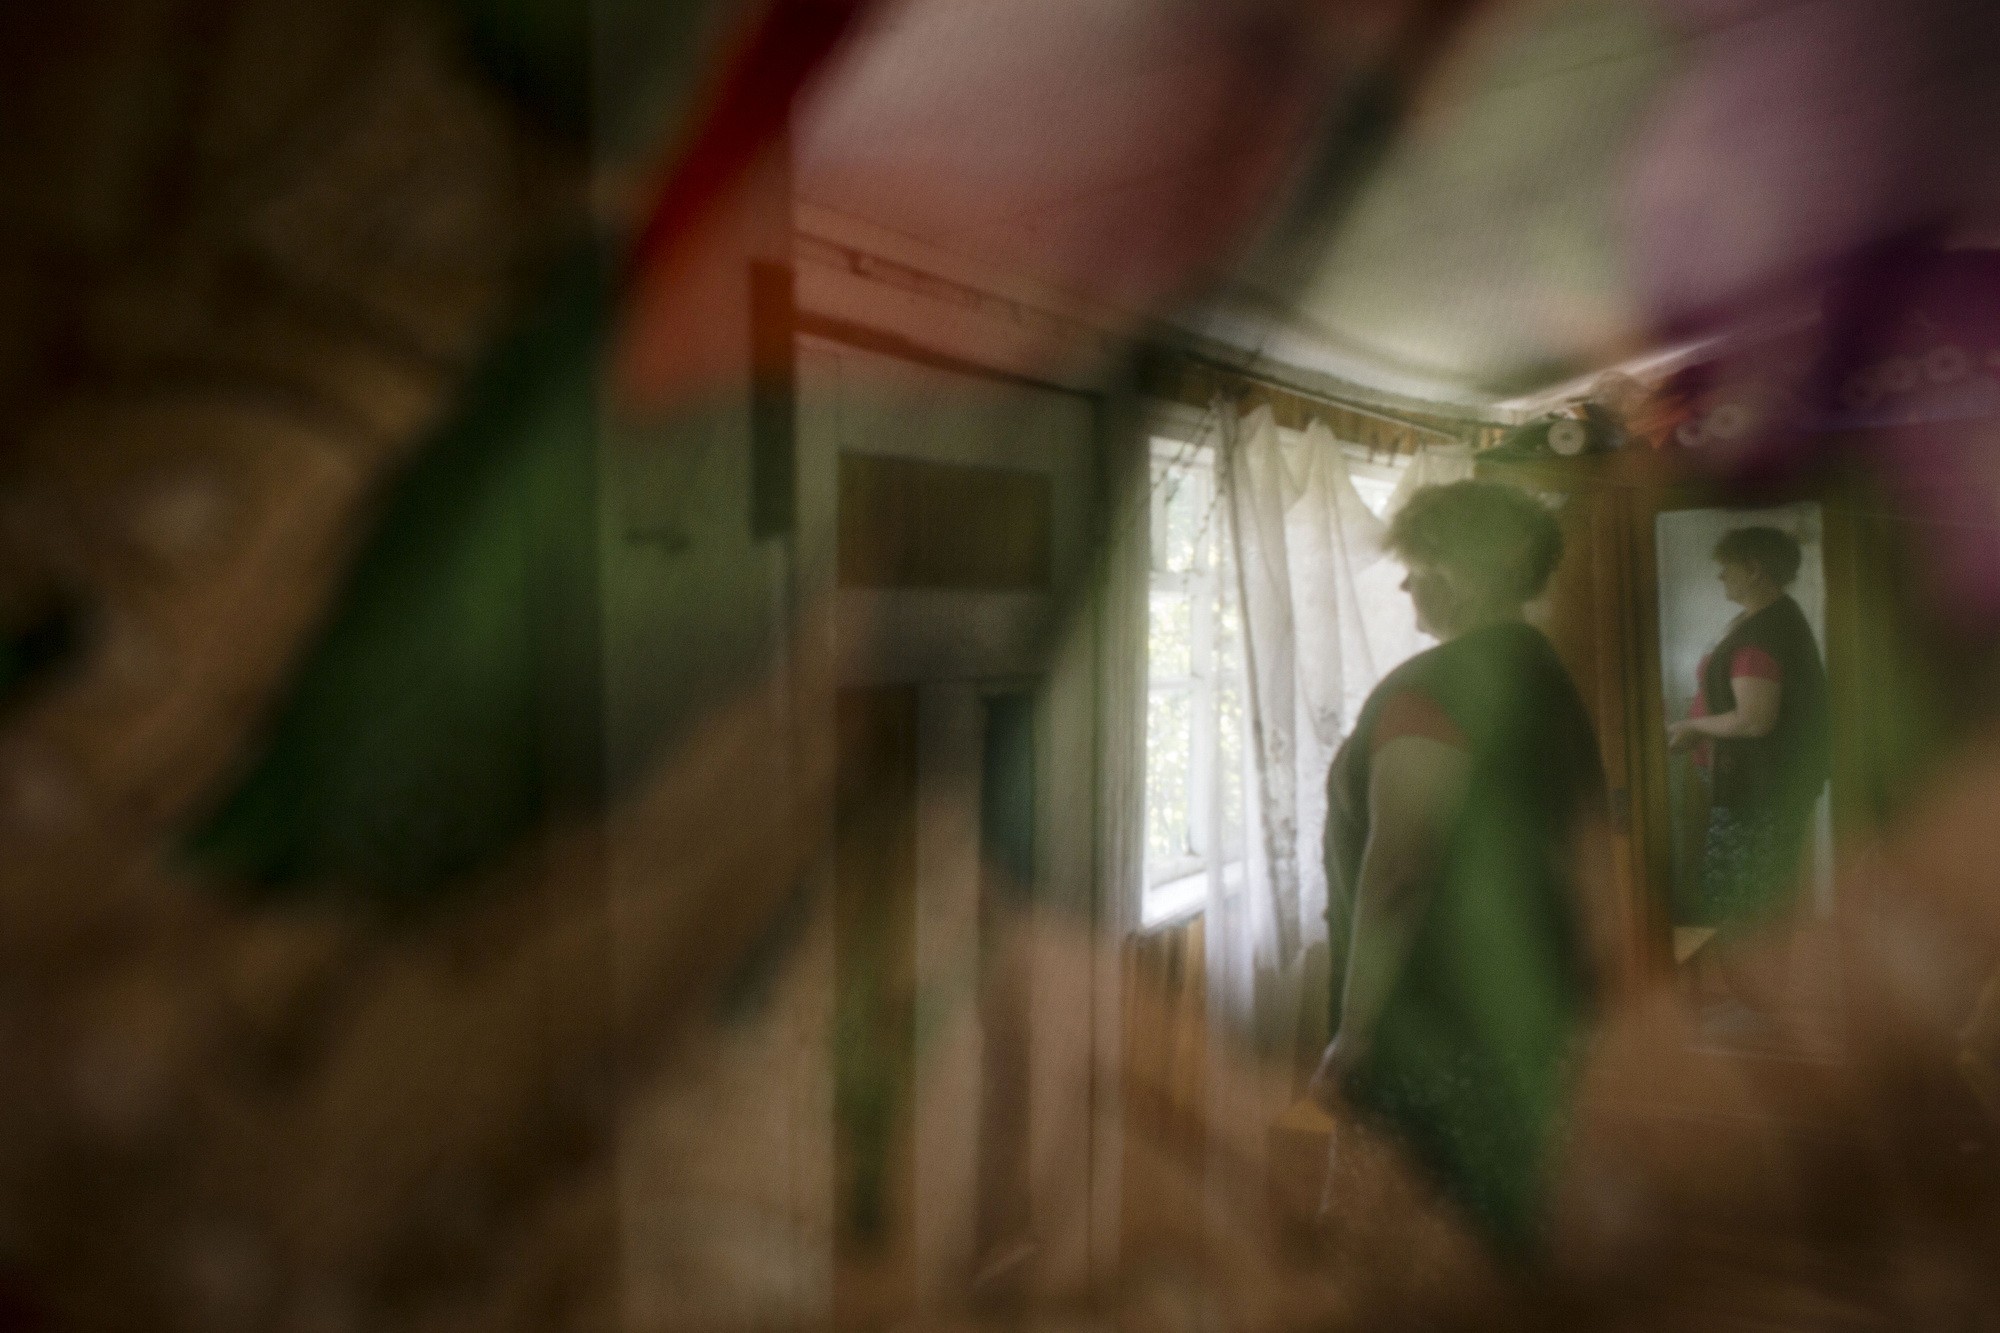 Olena Sugak looks through the window of her house in the village of Khrystophorivka in Dnipropetrovsk Oblast. For almost three years she is looking for her son Ruslan who went missing in action in August 2014.